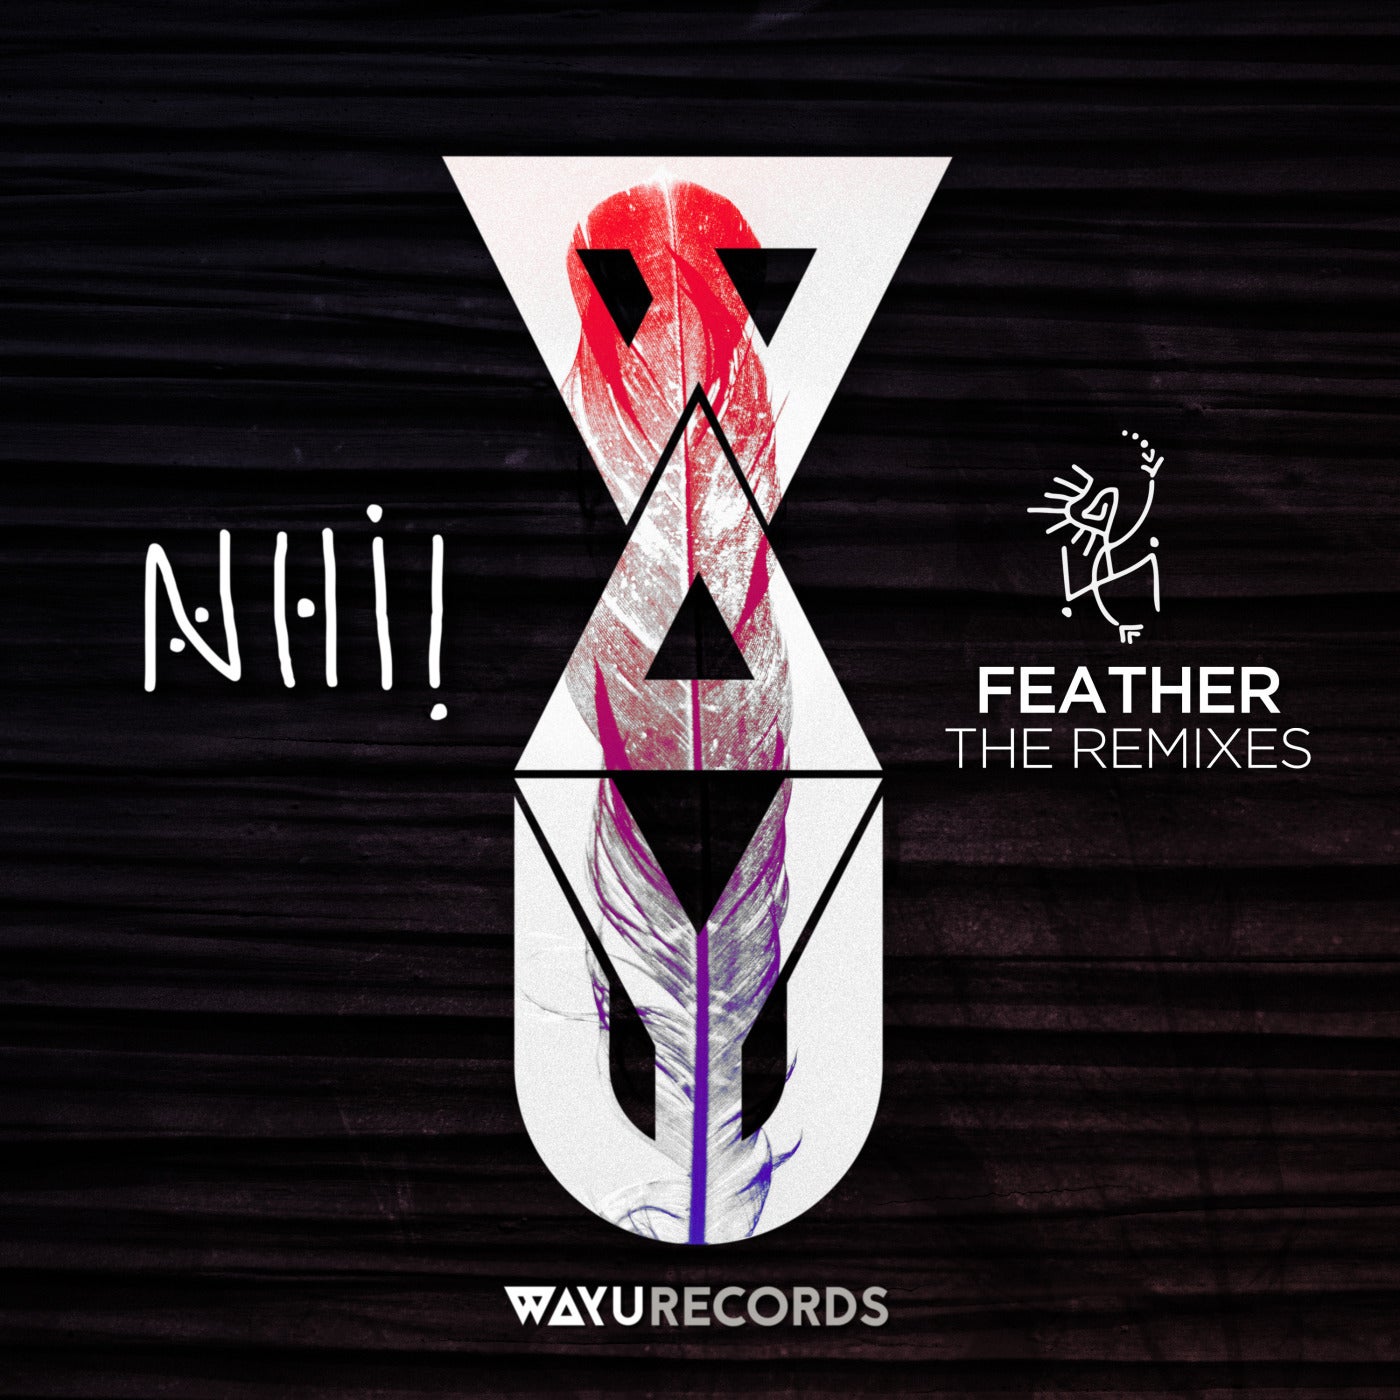 Feather (The Remixes)